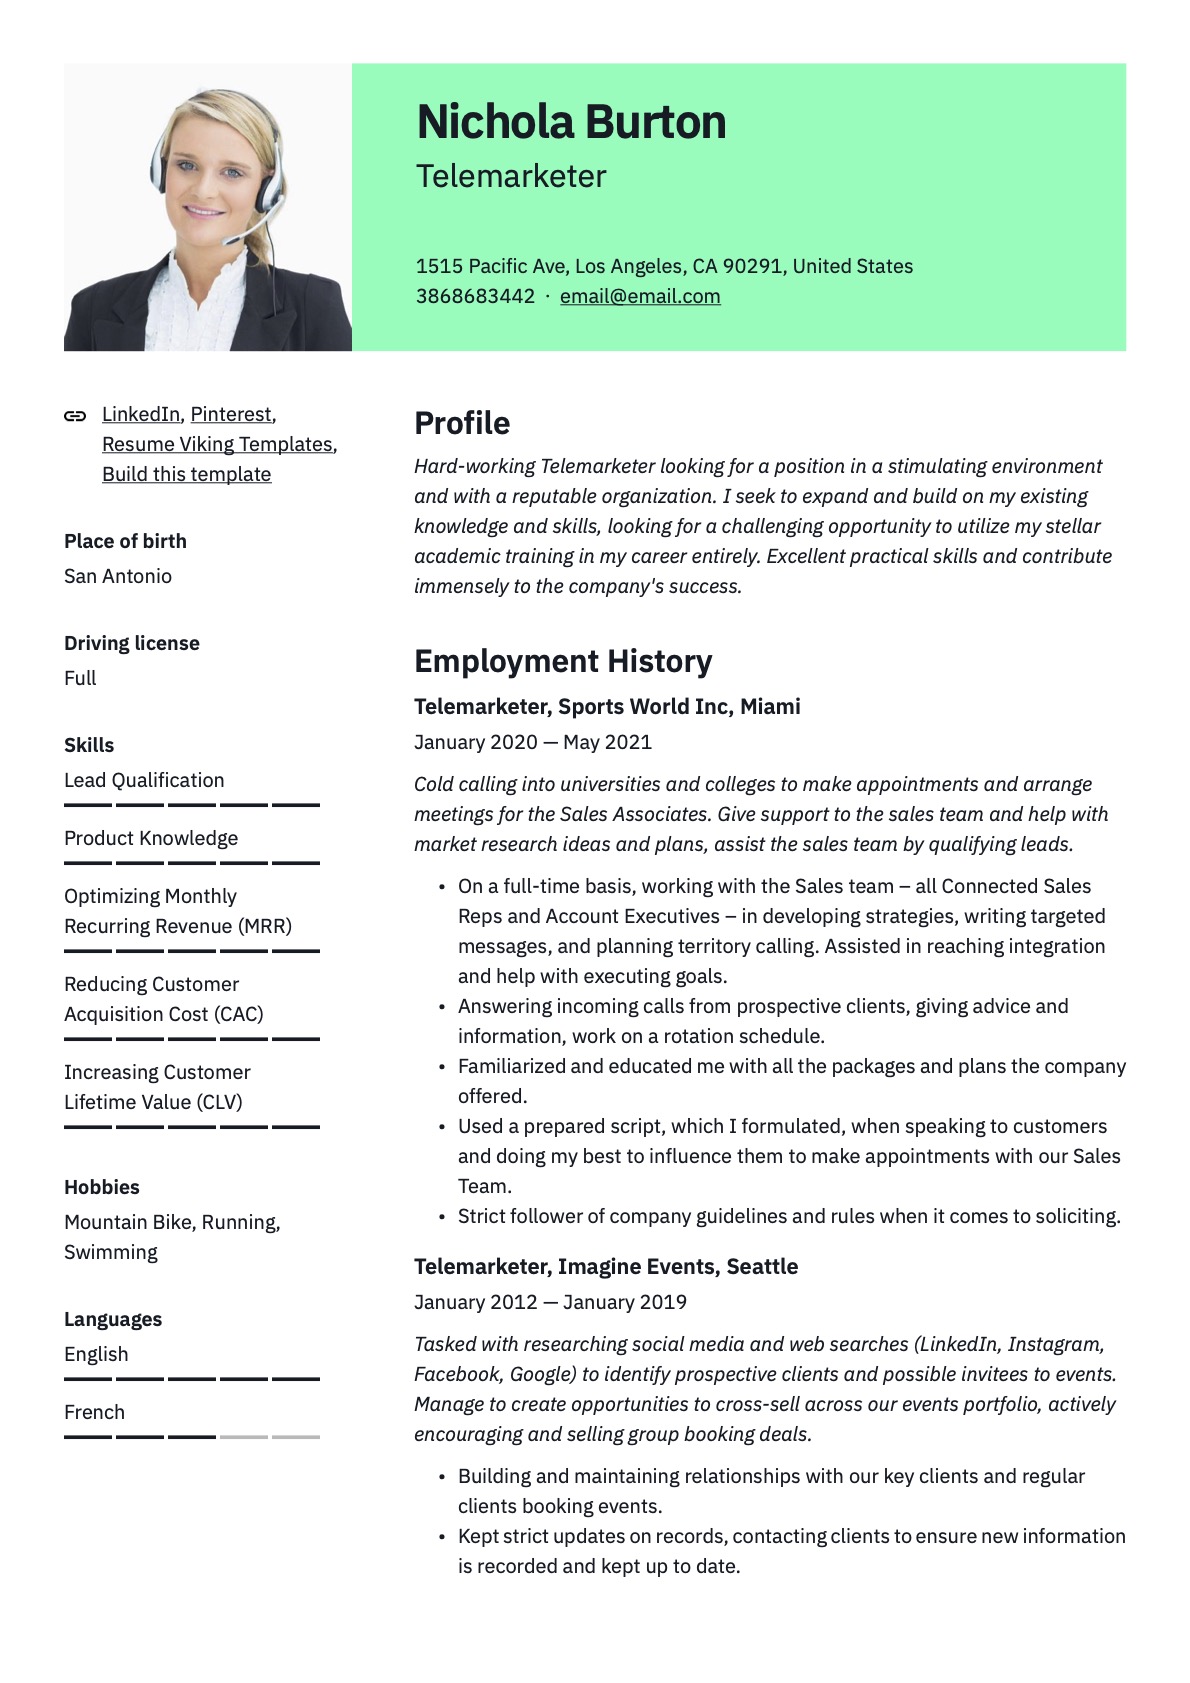 Professional Telemarketer Resume Green Template